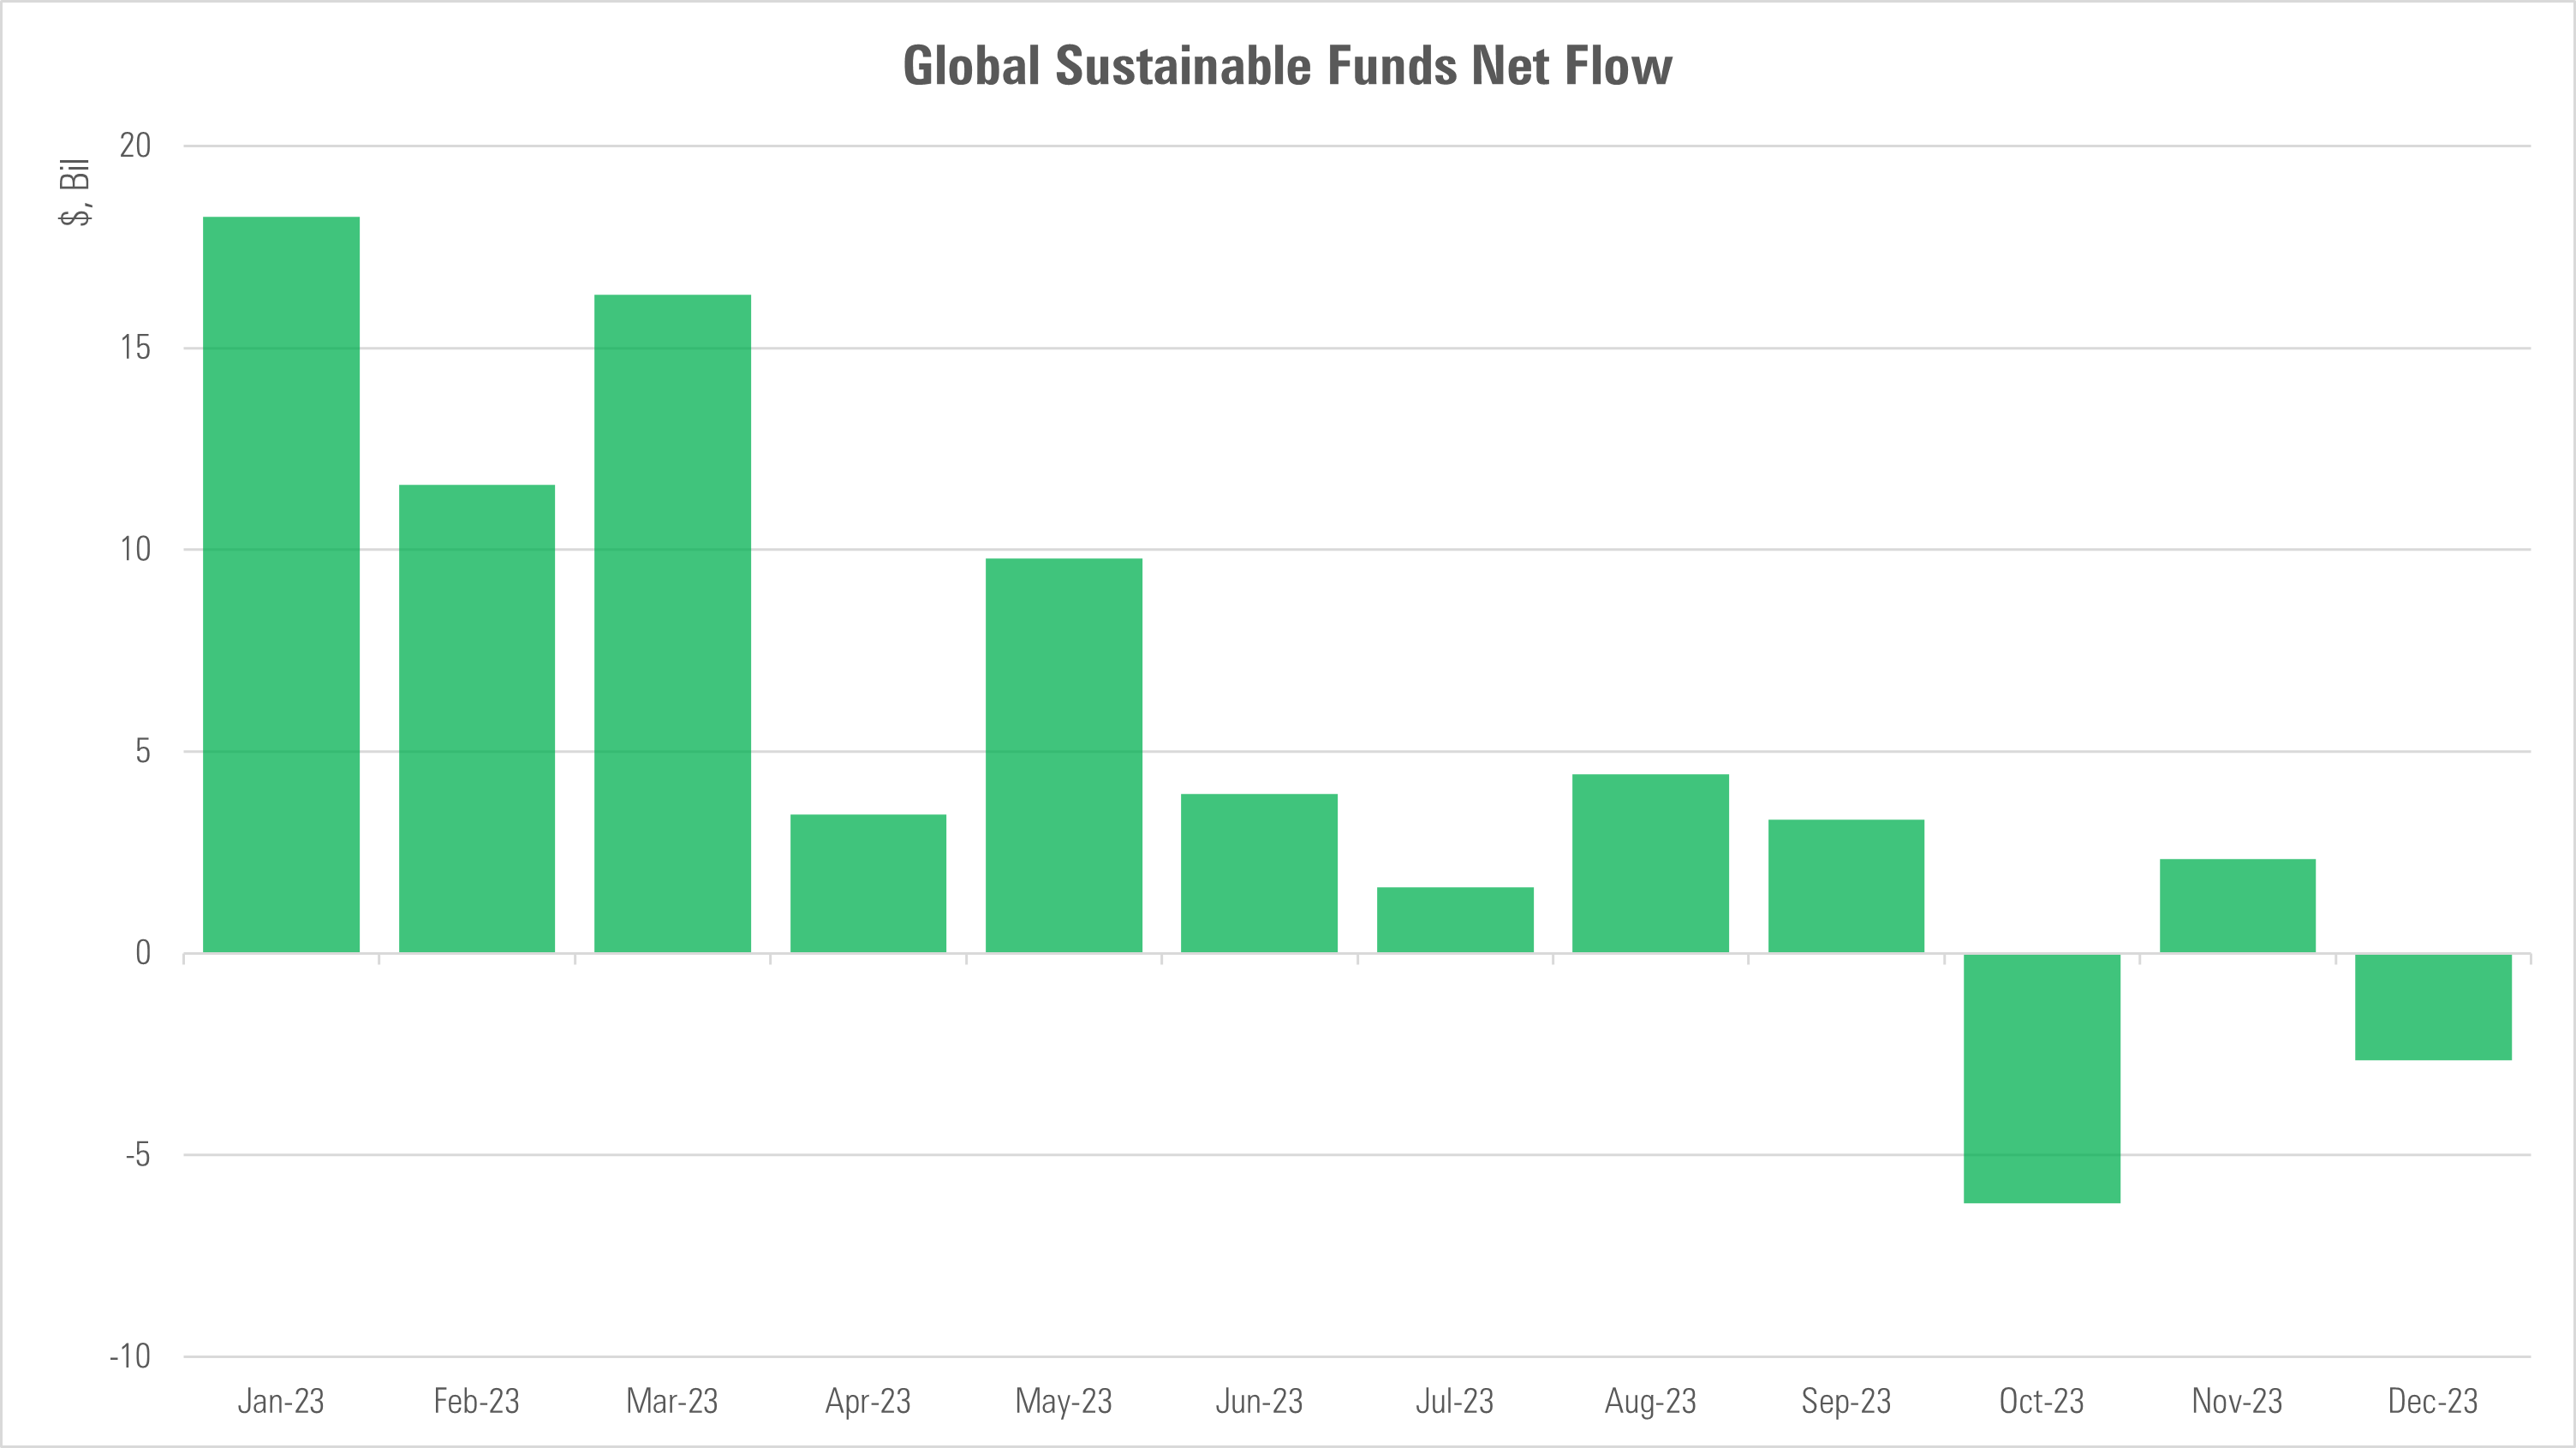 Investors have put more money into sustainable funds than nonsustainable funds for the first half of 2023.